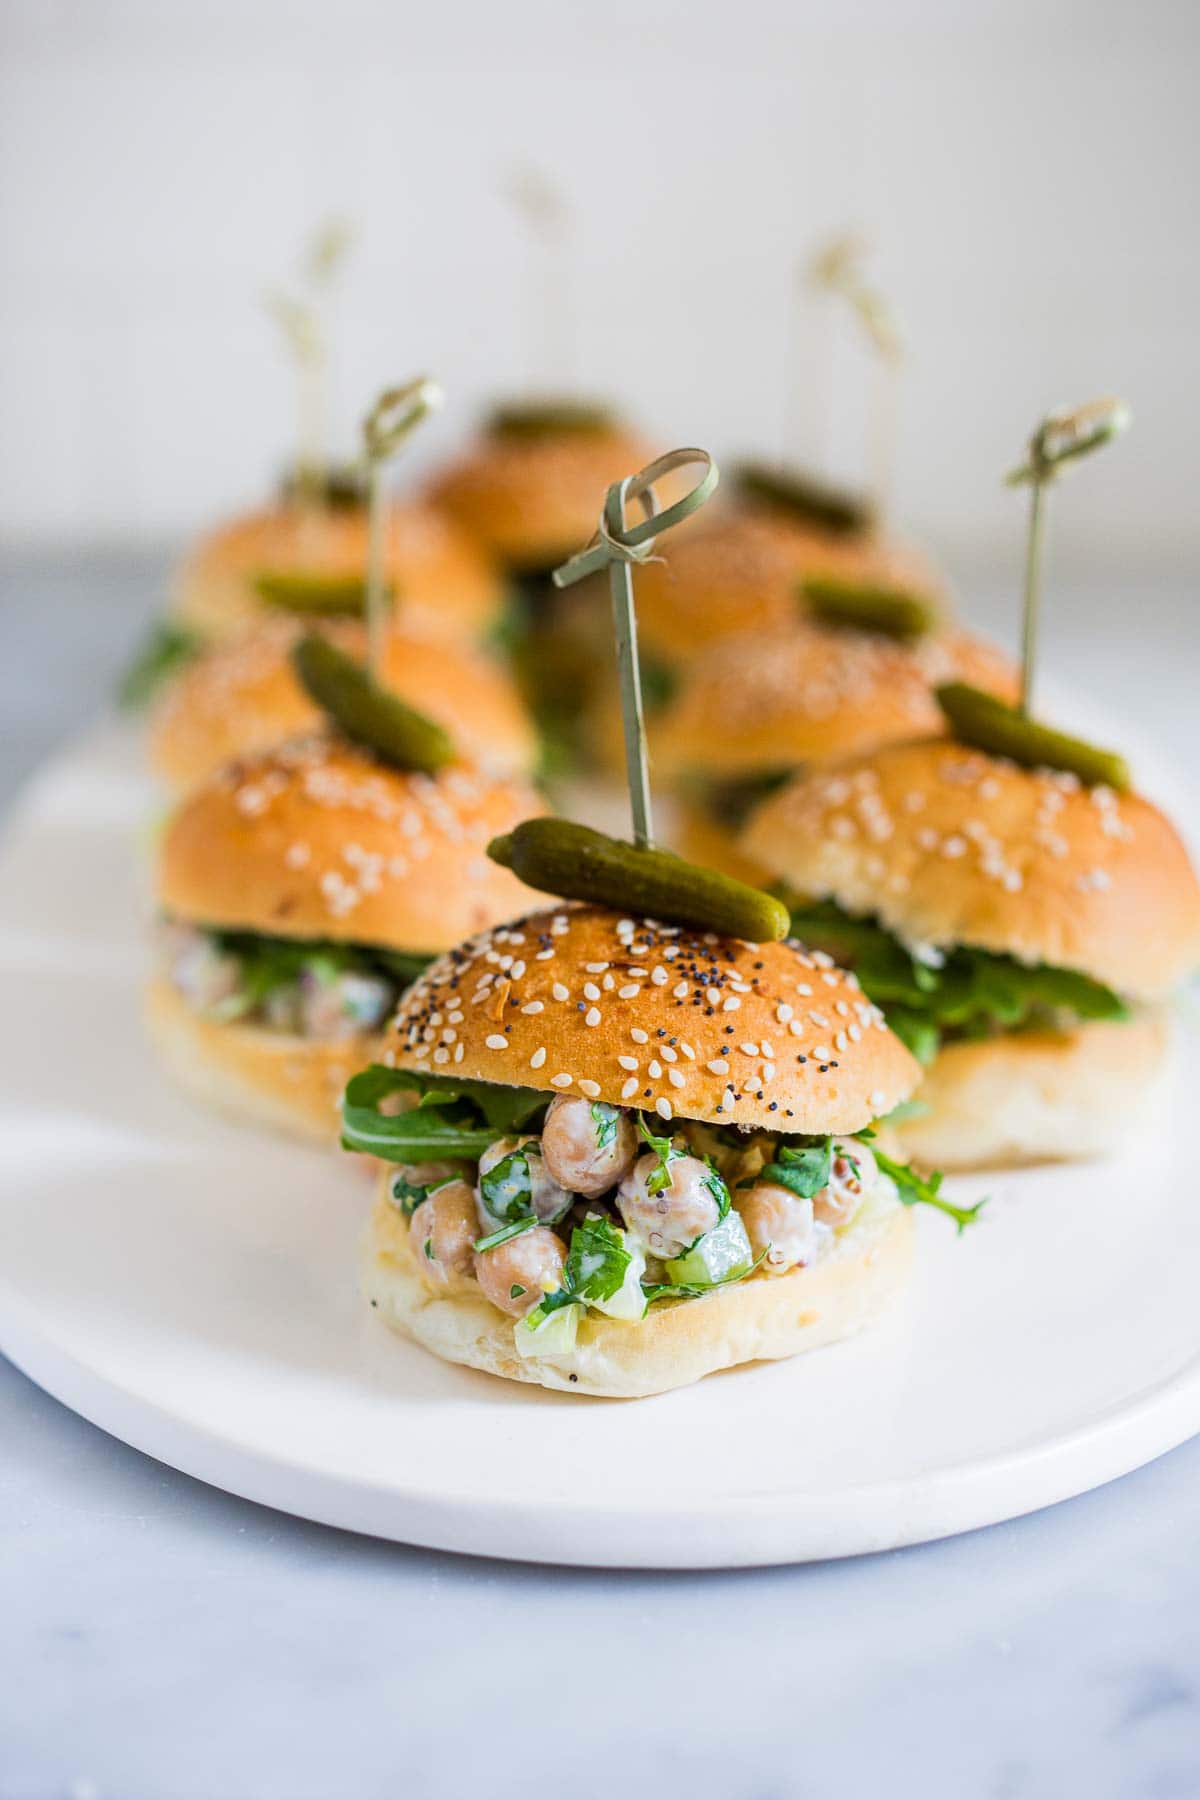 serving platter with chickpea salad sliders topped with cornichons on a skewer. 